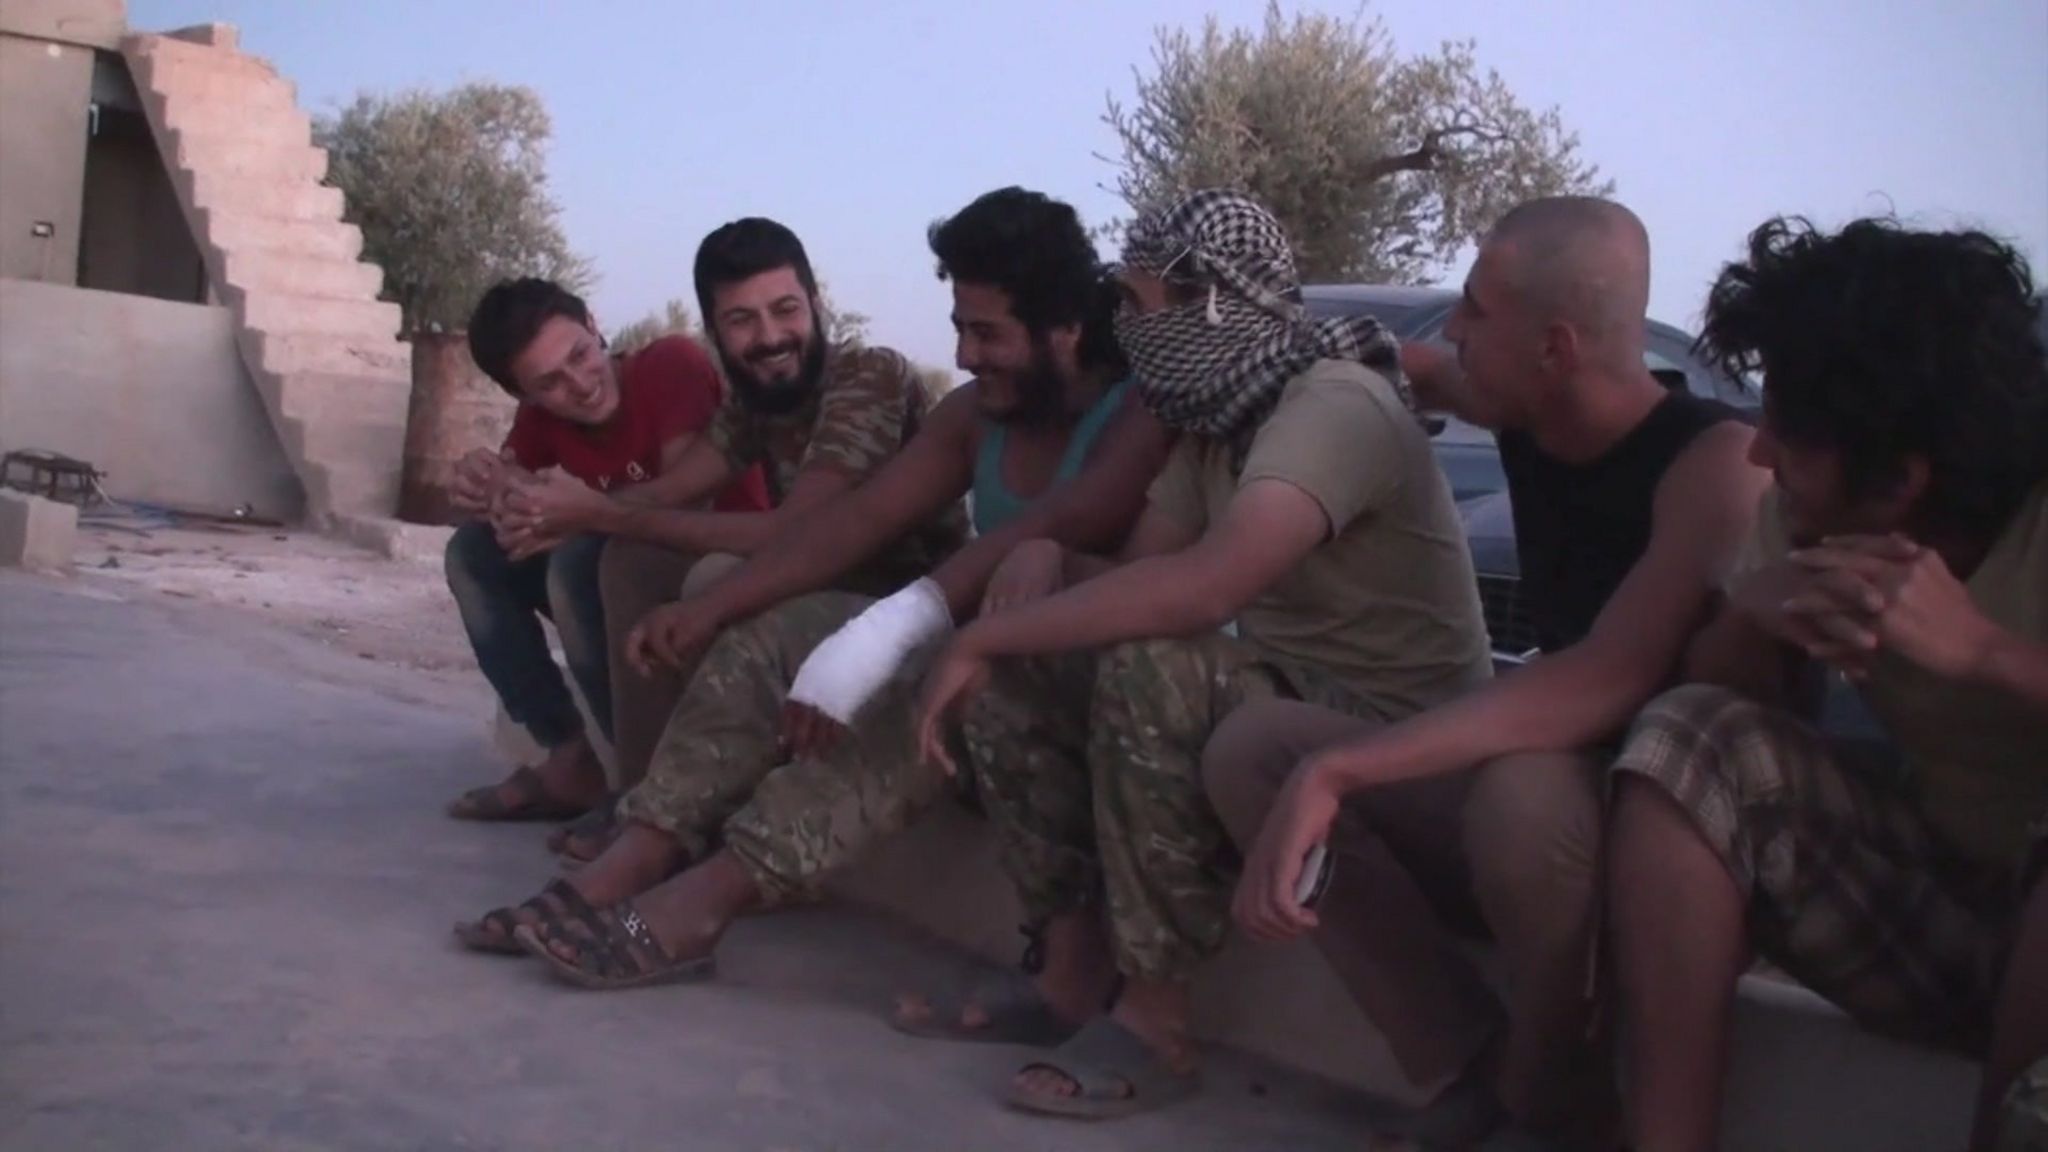 Islamic State defectors and captured militants at an internment camp in northern Syria